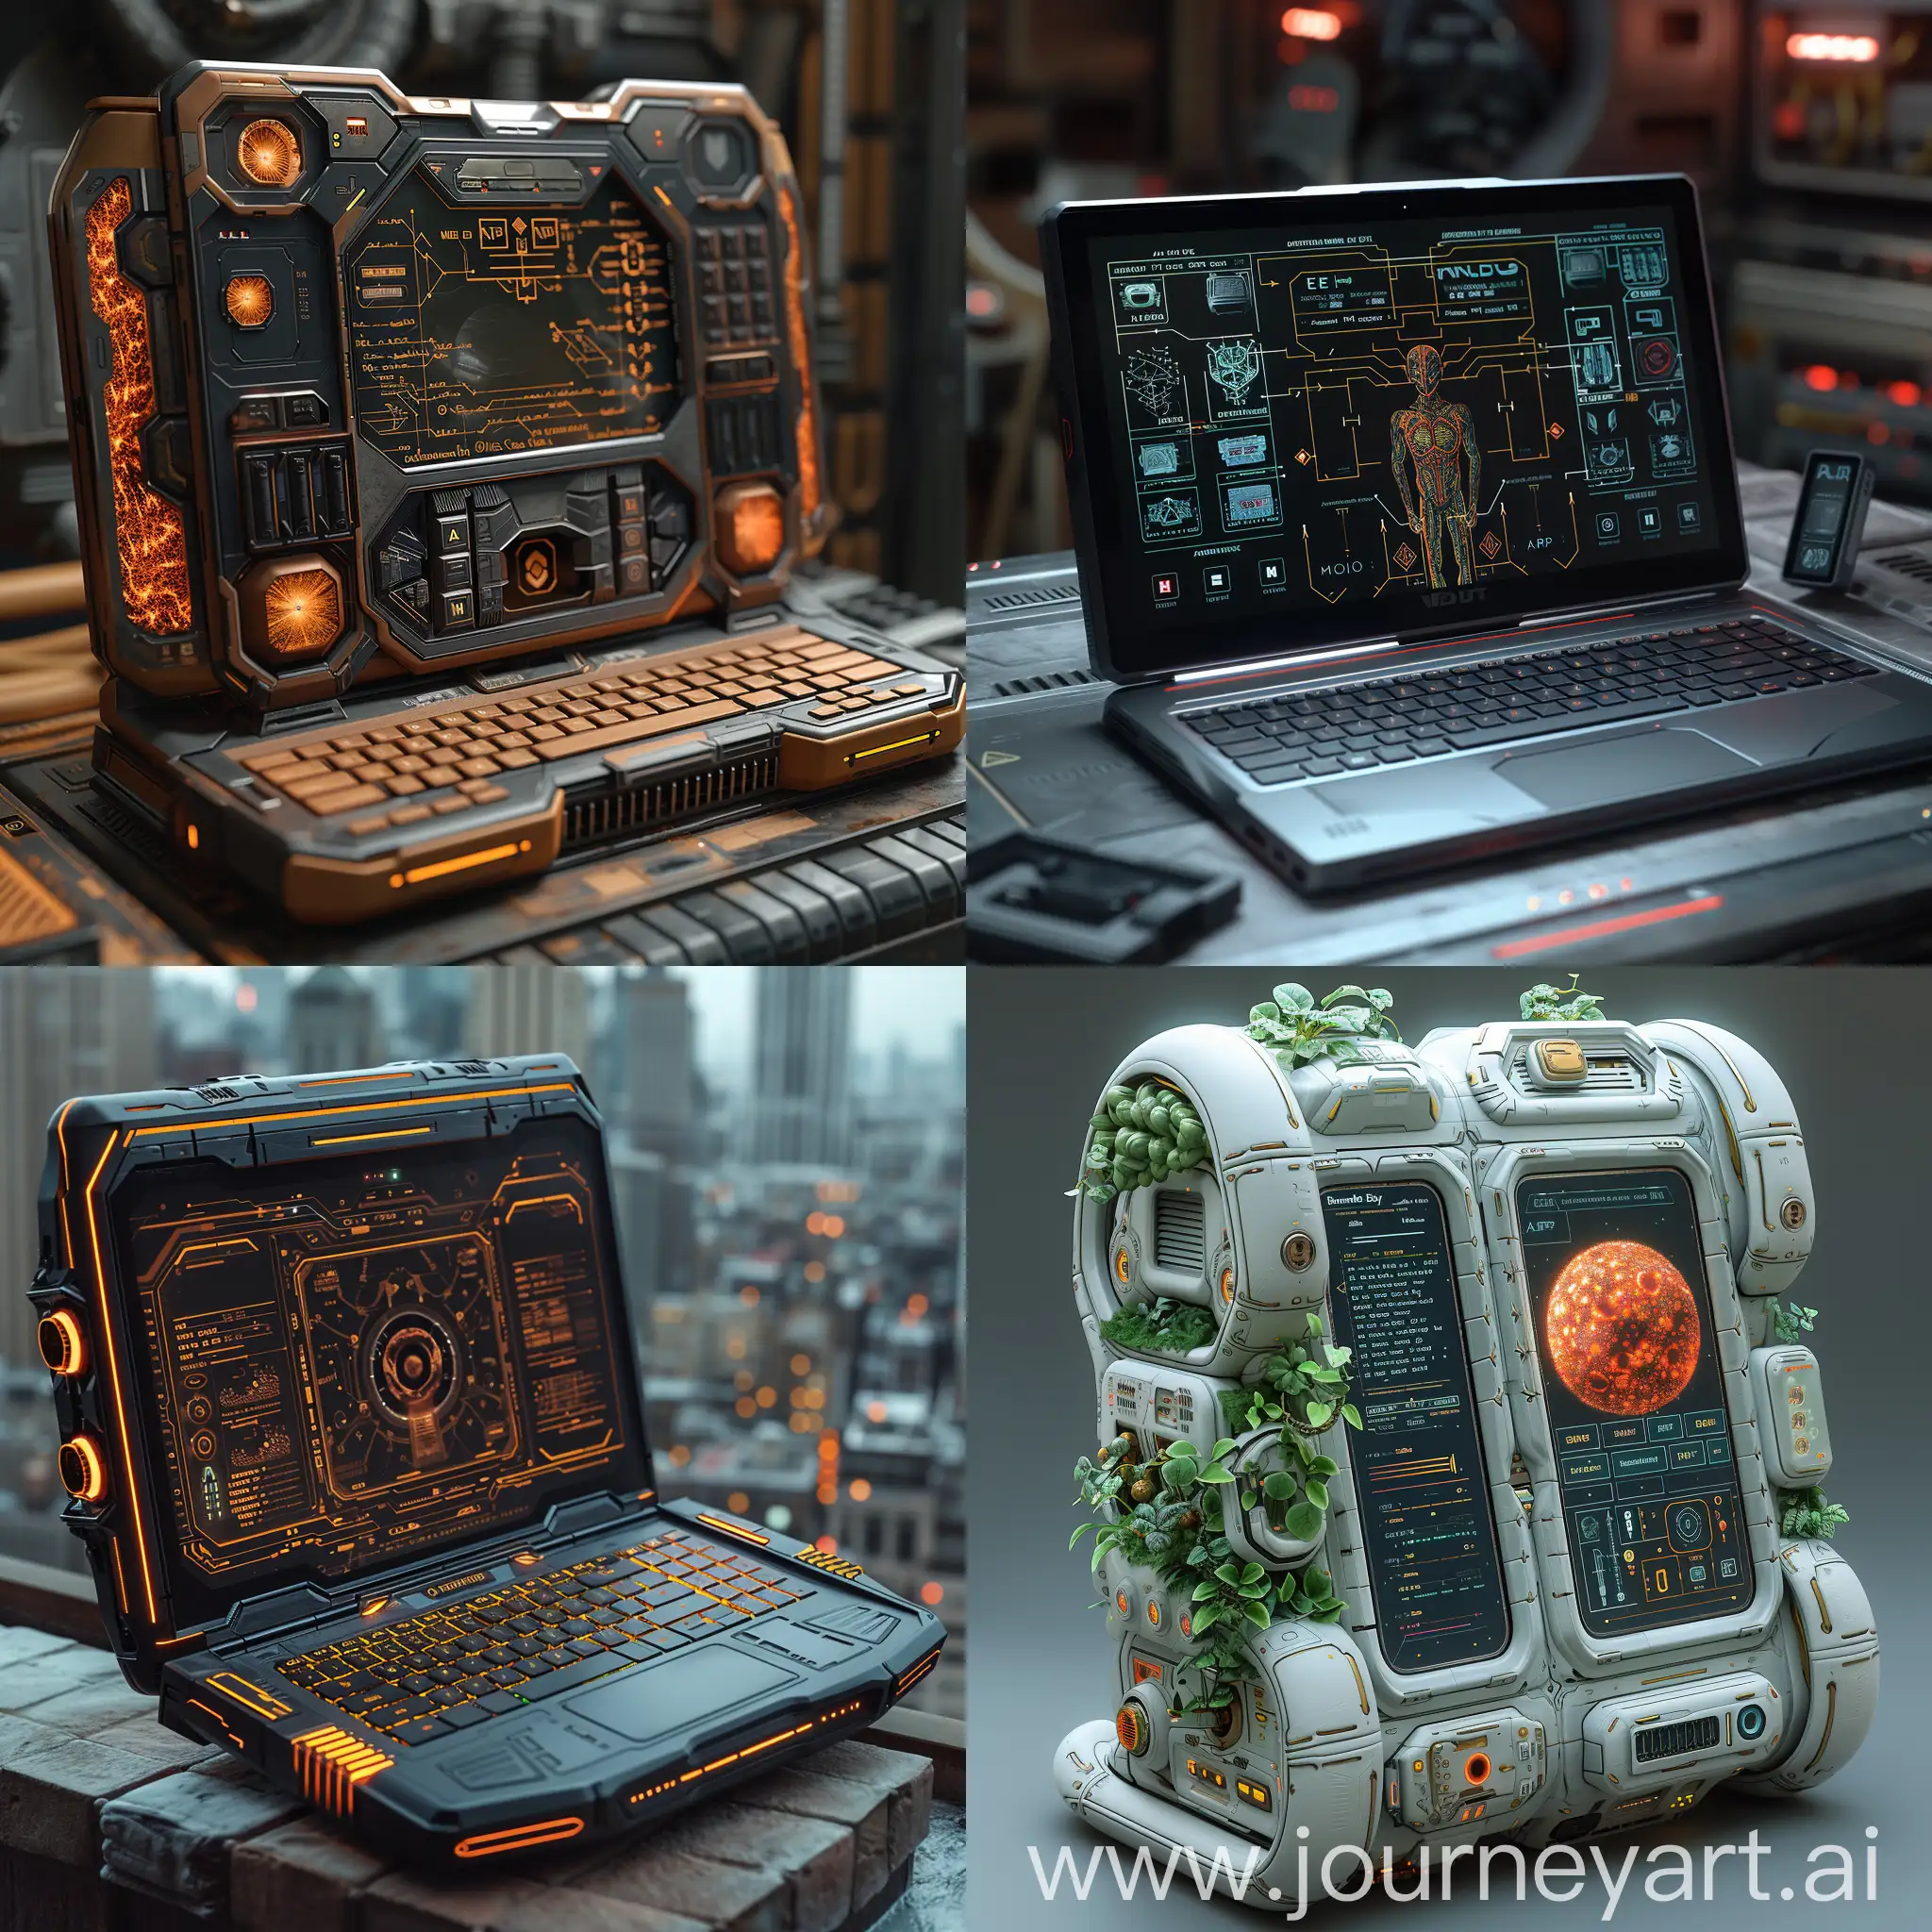 Futuristic laptop, Neural Processing Unit (NPU) inspired by "Strange Days" (1995), Bio-Organic Battery (BOB) inspired by "Avatar" (2009), Morphing Display (MD) inspired by "Terminator 2: Judgment Day" (1991), Self-Repairing Chassis (SRC) inspired by "The T-X" from "Terminator 3: Rise of the Machines" (2003), Universal Translator (UT) inspired by "Arrival" (2016), Emotion Sensor (ES) inspired by "Minority Report" (2002), Augmented Reality Projection (ARP) inspired by "A Scanner Darkly" (2006), Quantum Encryption Engine (QEE) inspired by "Inception" (2010), Weather-Adaptive Cooling System (WACS) inspired by "Waterworld" (1995), Holographic Keyboard (HK) inspired by "Star Wars" franchise, Morphing Skin (MS) inspired by "Annihilation" (2018), E Ink Display Lid (EIDL) inspired by "Minority Report" (2002), Solar Charging Back (SCB) inspired by "Sunshine" (2007), Biometric Fingerprint Lock (BFL) inspired by "Blade Runner" (1982), Augmented Reality Bezel (ARB) inspired by " Paprika" (2006), Kinetic Hinge (KH) inspired by "The Cell" (2004), Modular Expansion Ports (MEP) inspired by "Cloud Atlas" (2012), Mood Lighting (ML) inspired by "Her" (2013), Wireless Charging Mat (WCM) inspired by "Inception" (2010), AI-Powered Assistant Projector (AIPA) inspired by "Her" (2013), unreal engine 5 --stylize 1000